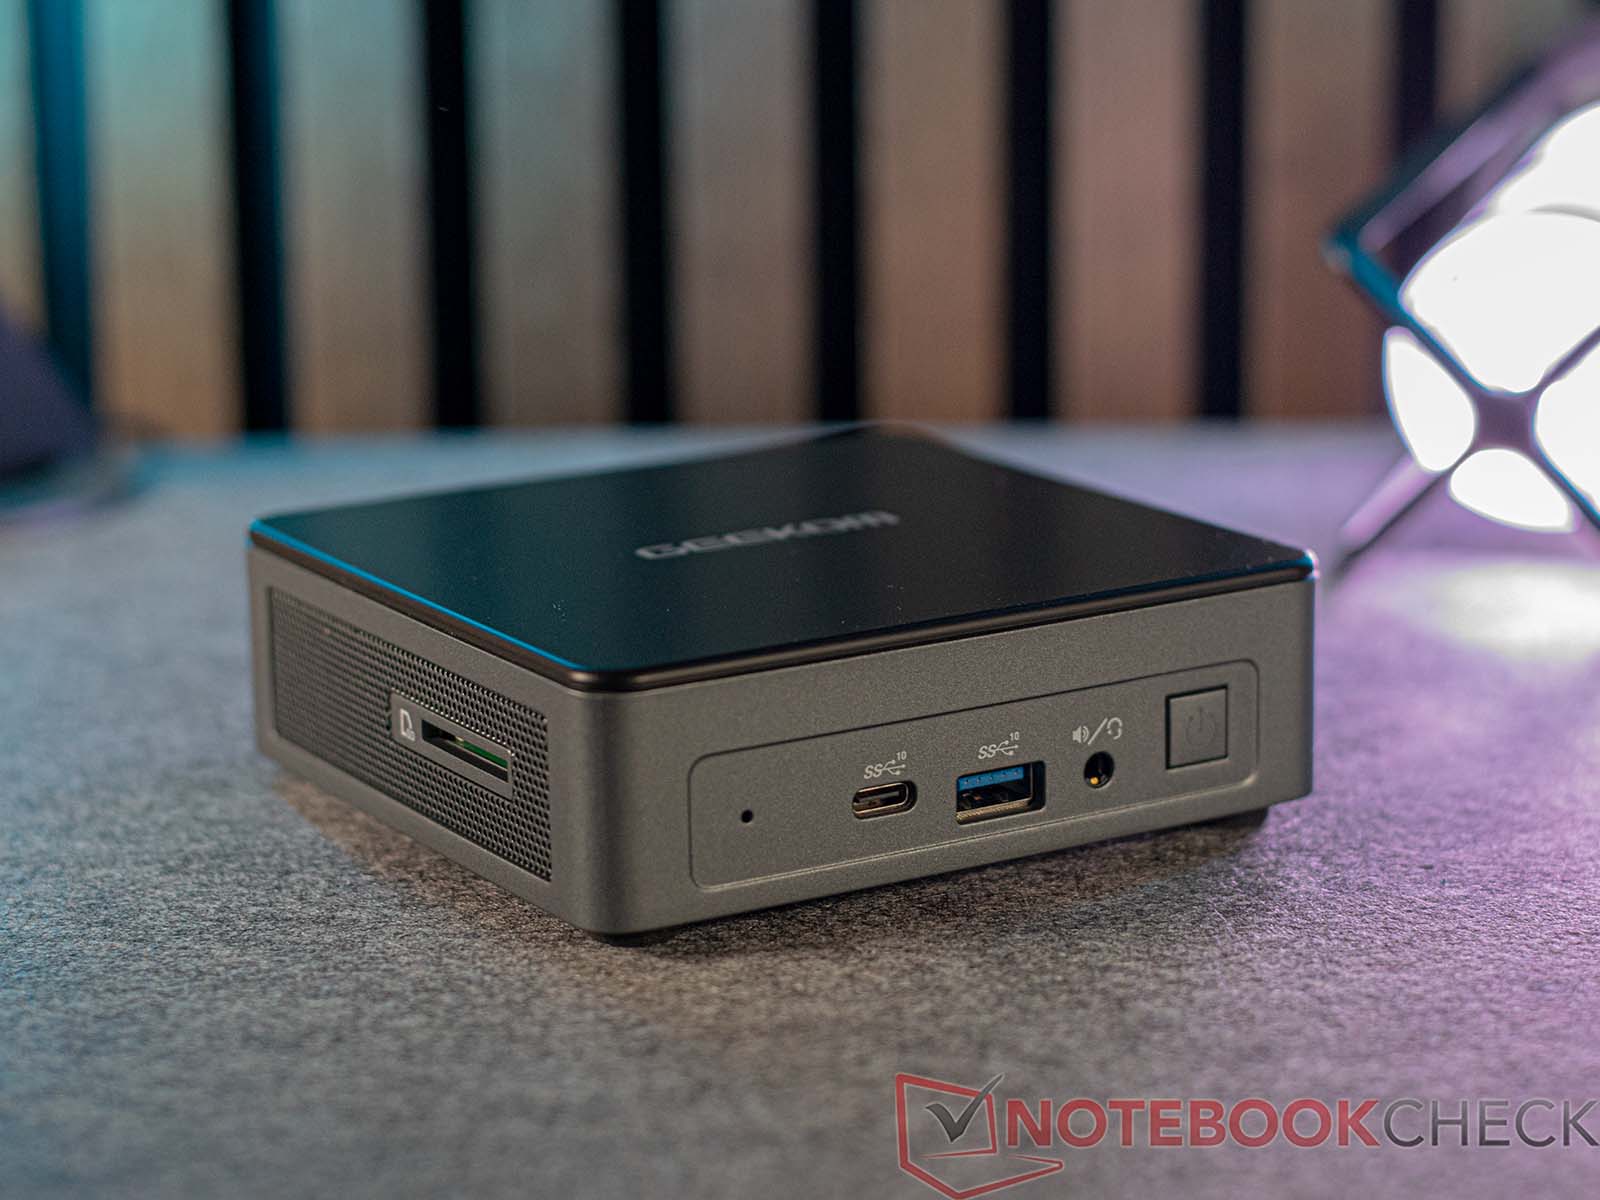 Beelink S1 Mini PC Comes with Up to 8GB RAM, Supports M.2 SSD